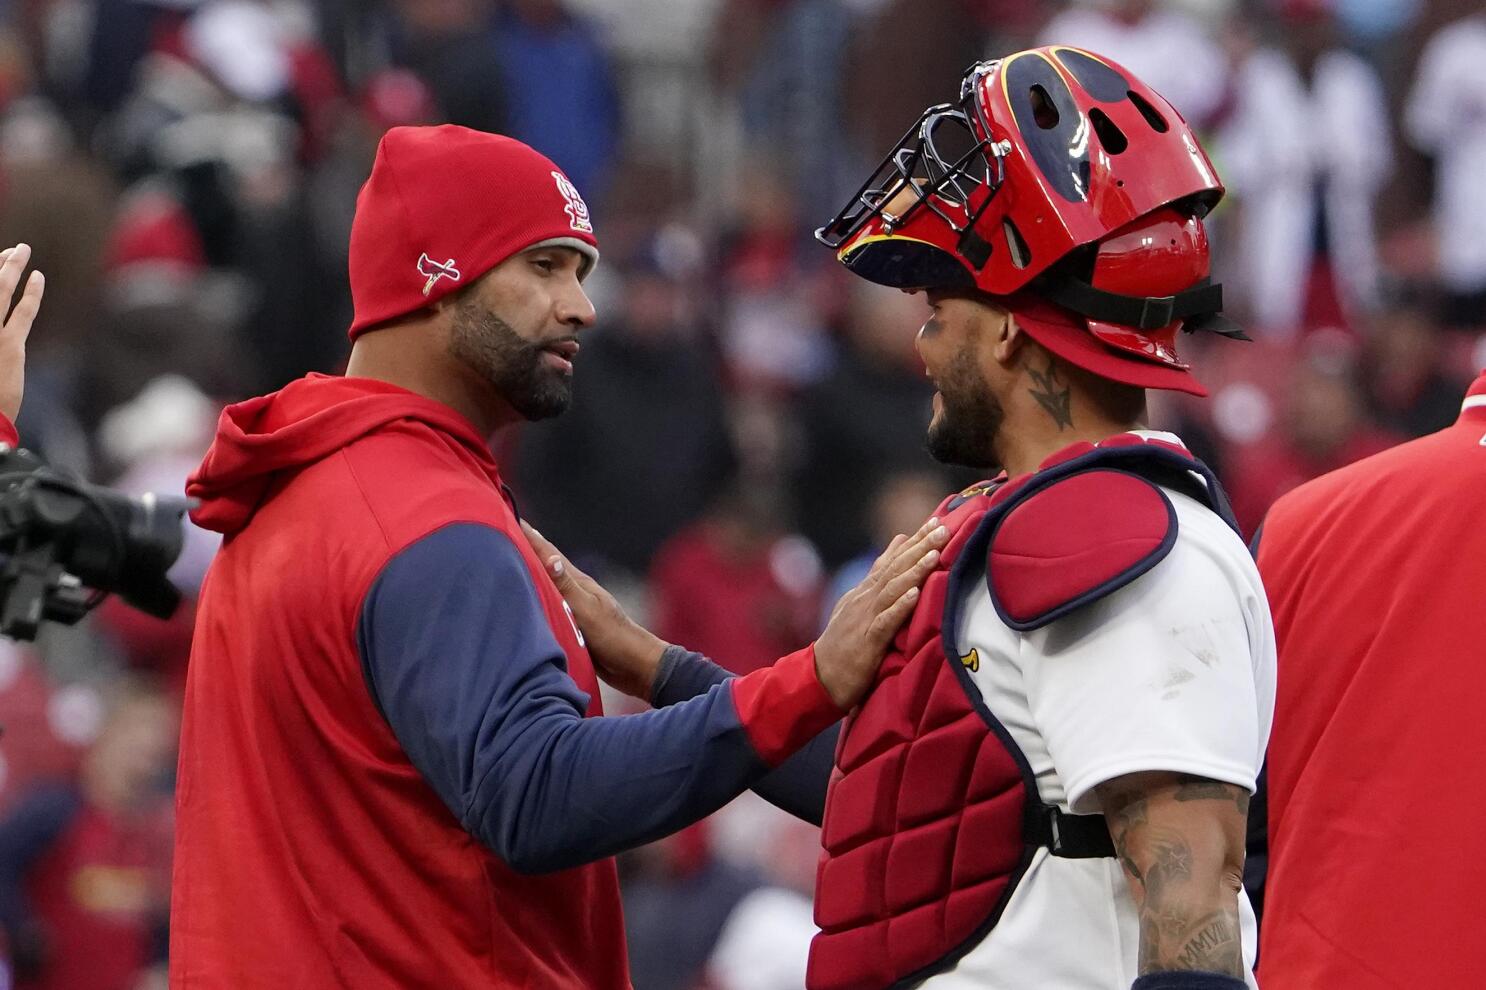 Albert Pujols concludes St. Louis return with 2 hits, Molina